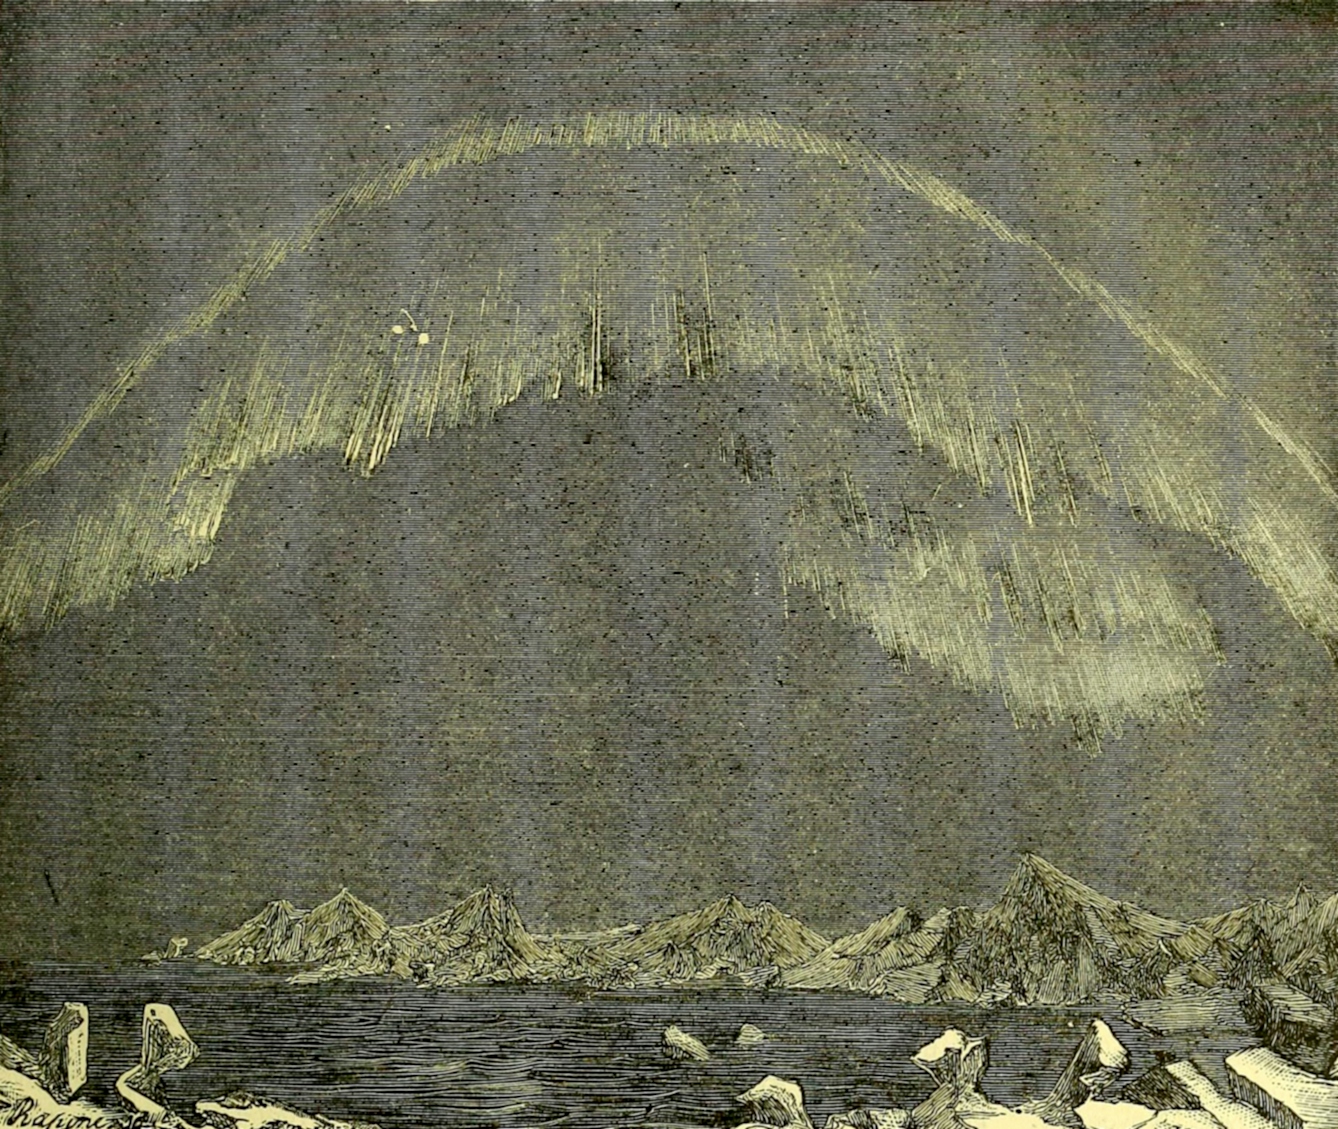 This illustration shows a display seen at Bossekop (in the west of Norway) in 1838.